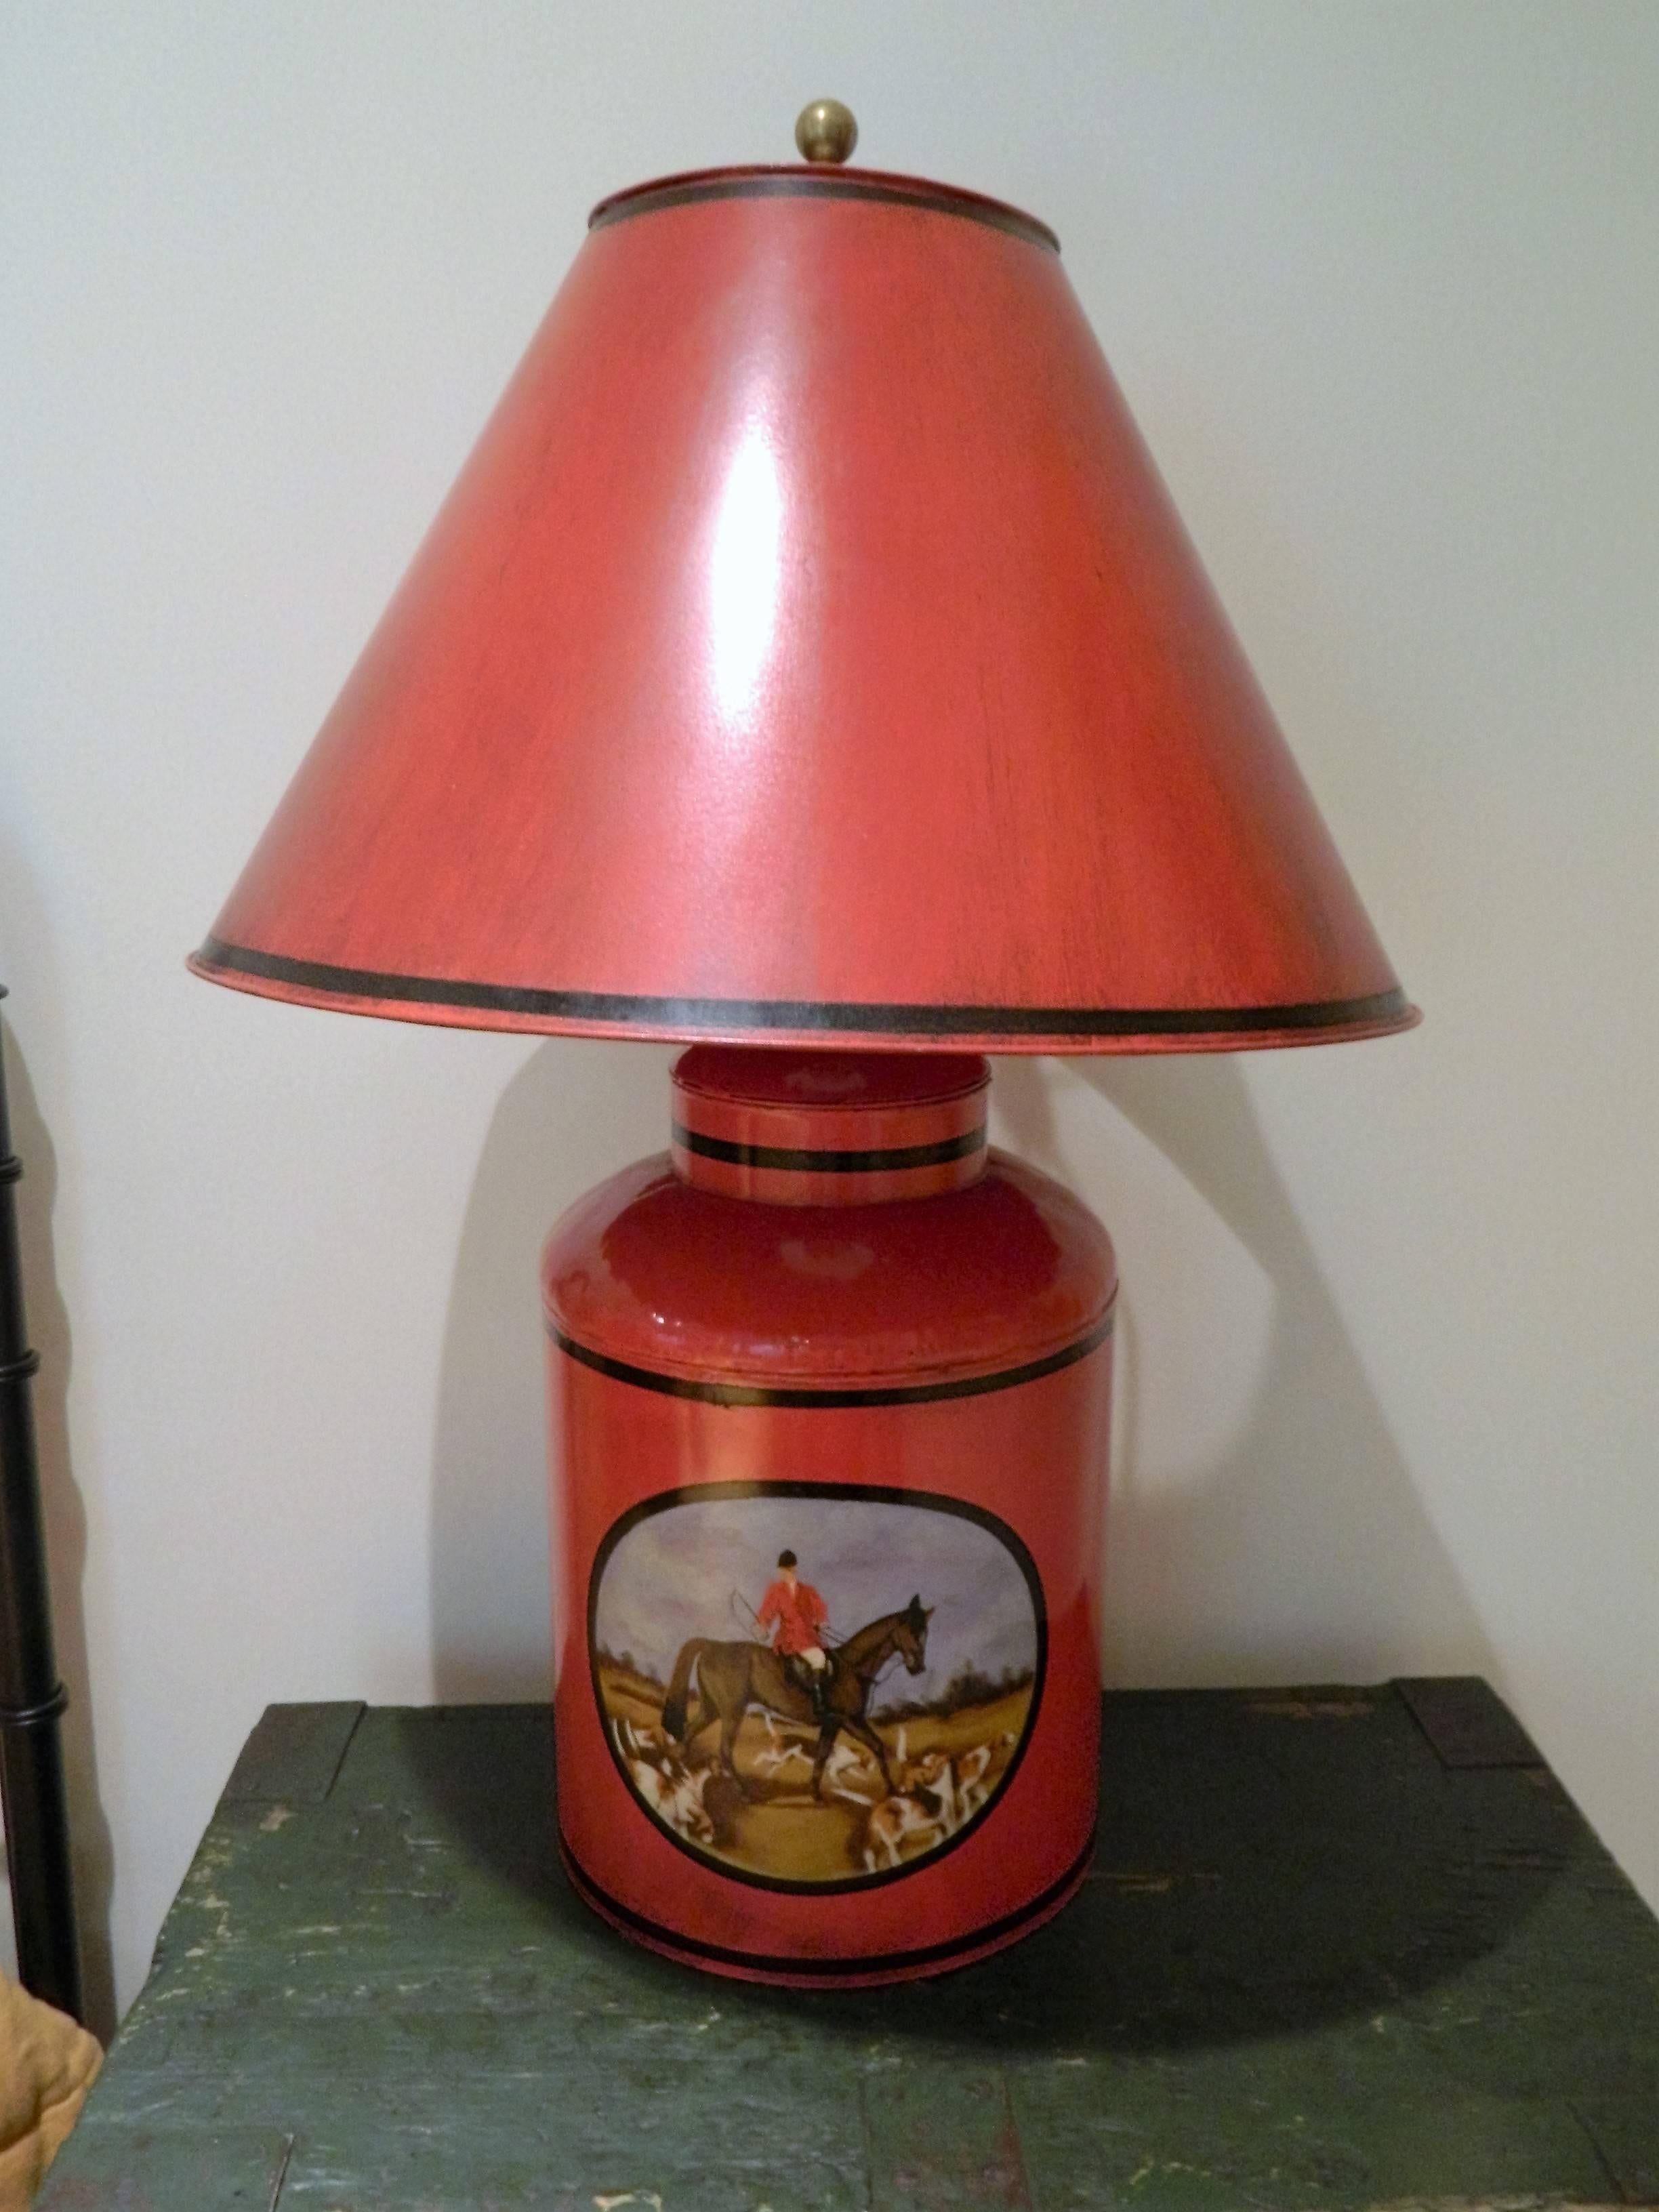 Pair of painted tole canisters adapted as lamps with horse scenes, 20th century.
               